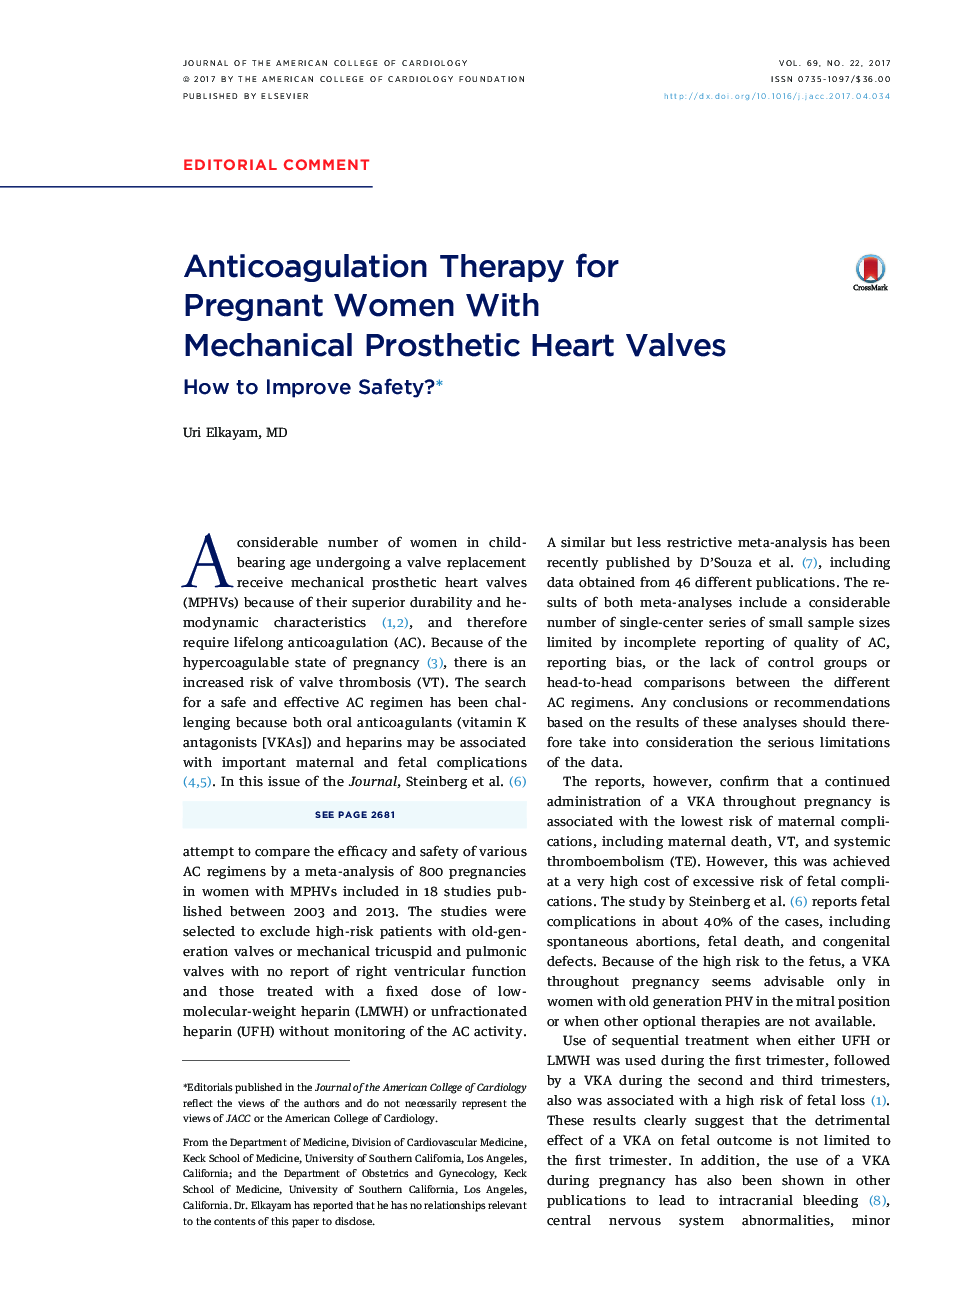 Anticoagulation Therapy for PregnantÂ Women With MechanicalÂ Prosthetic HeartÂ Valves